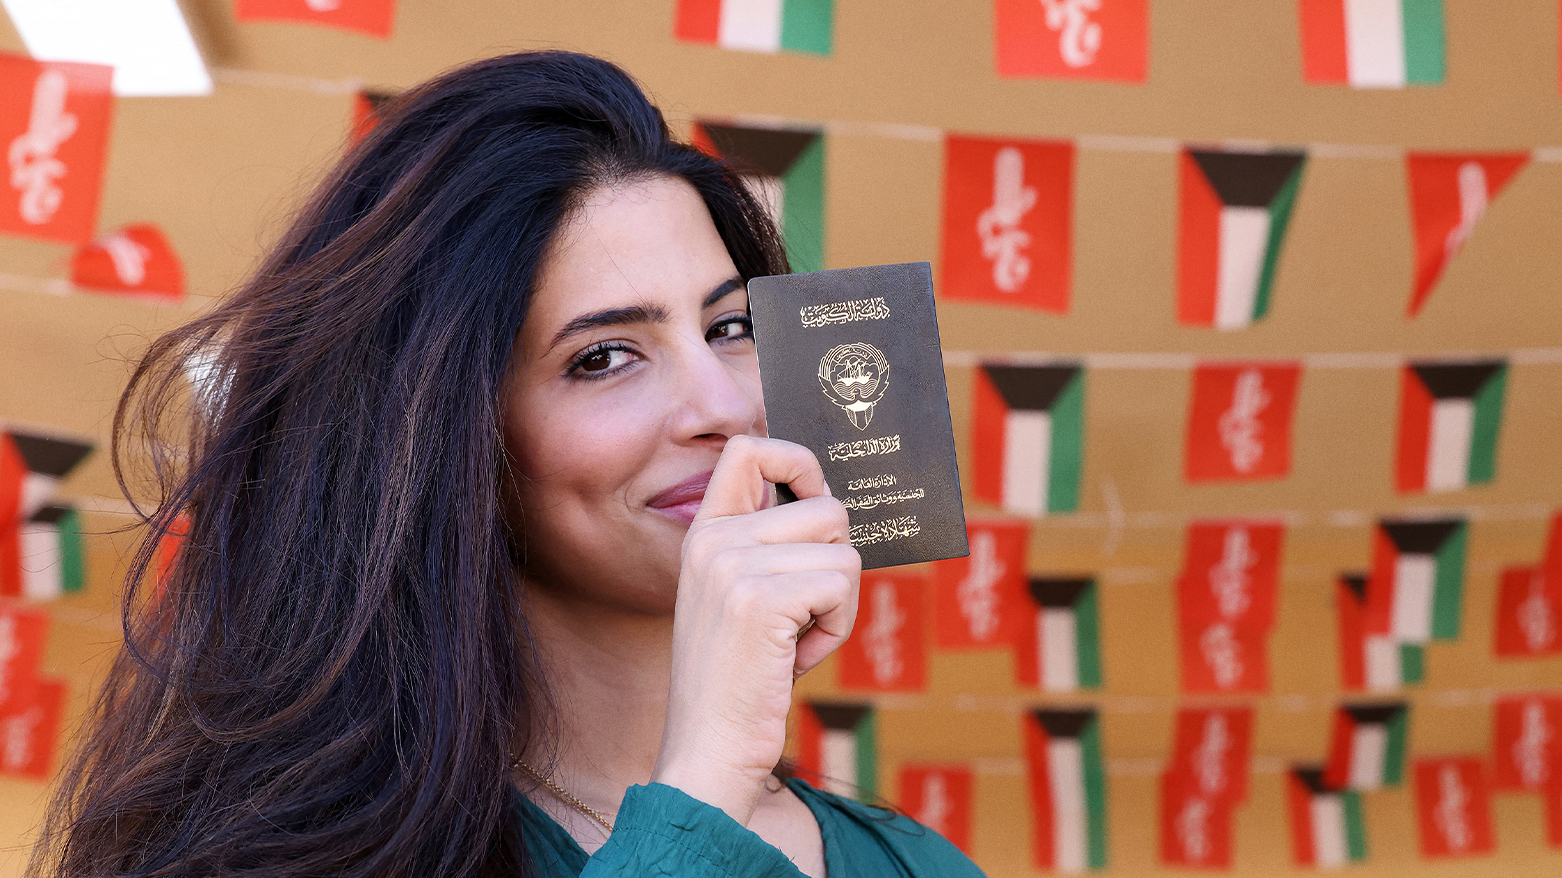 A Kuwaiti woman displays her passport as she arrives to vote in parliamentary elections at a polling station in Kuwait City. (Photo: YASSER AL-ZAYYAT / AFP)